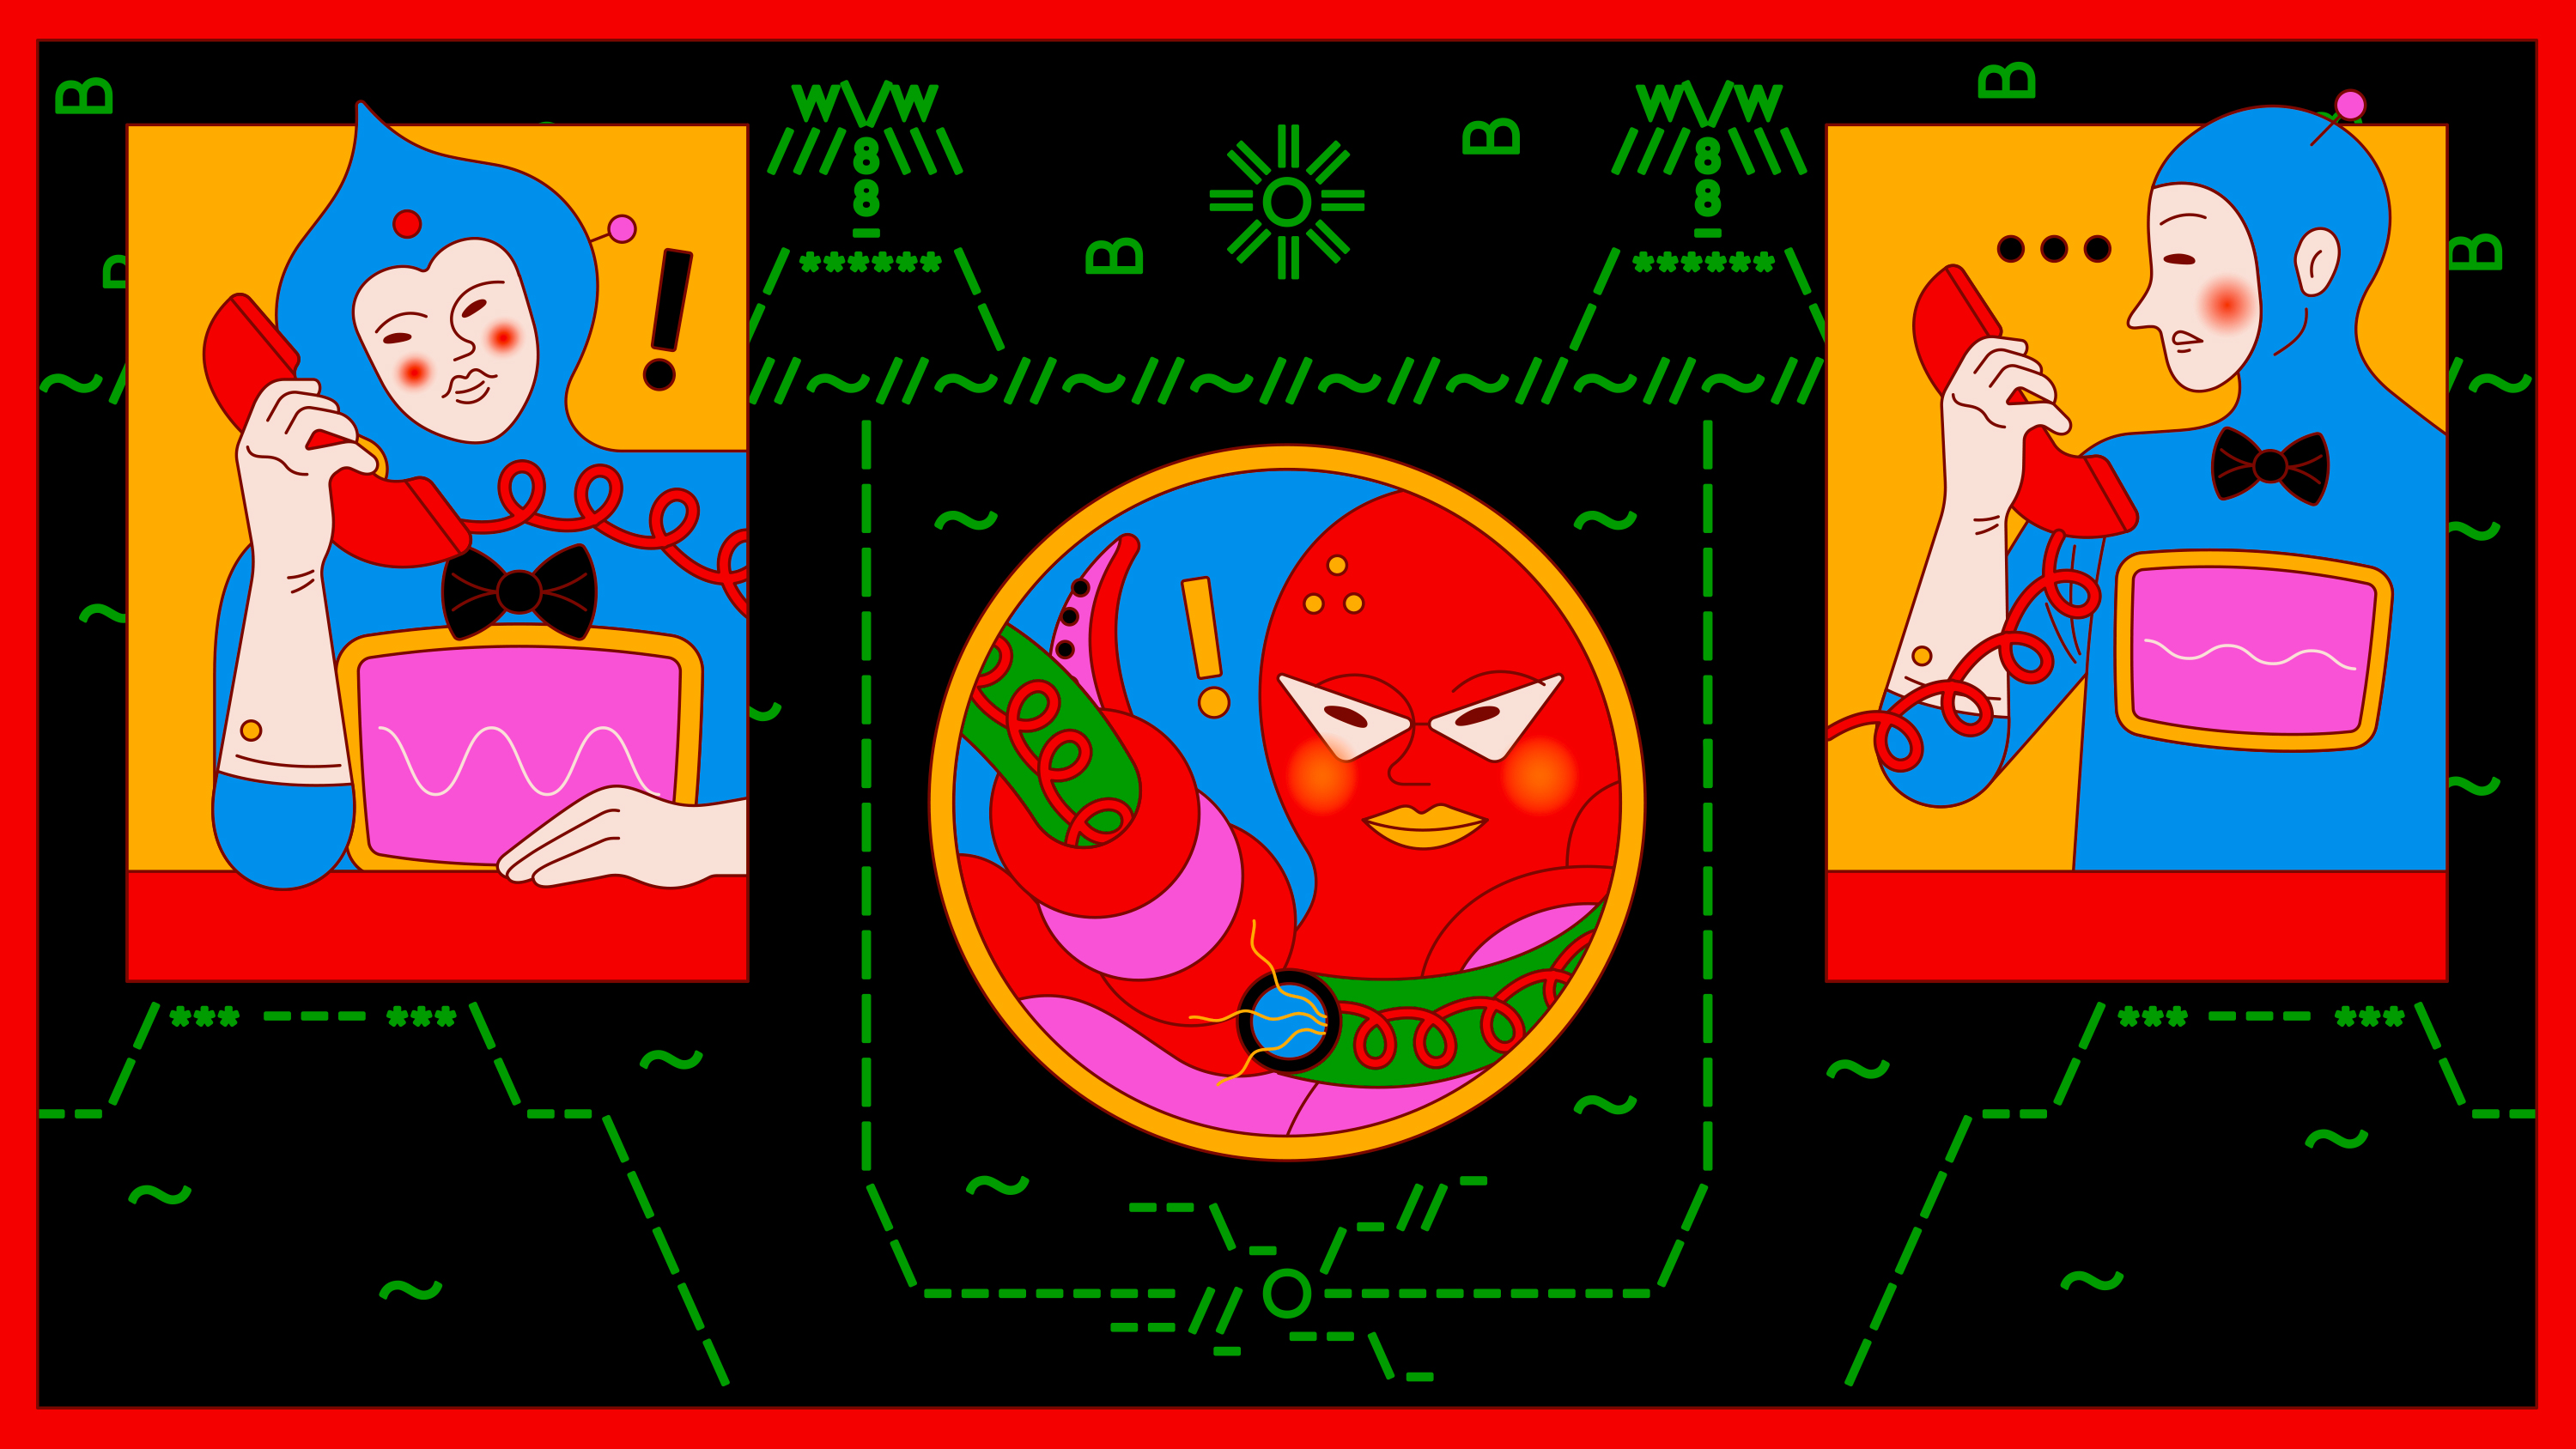 two characters holding landline phone receivers inset at the top left and right of a tropical scene in ascii code. An octopus inset at the bottom between them is tangled in their cable. The top left character continues speaking into the receiver while the top left character looks confused.